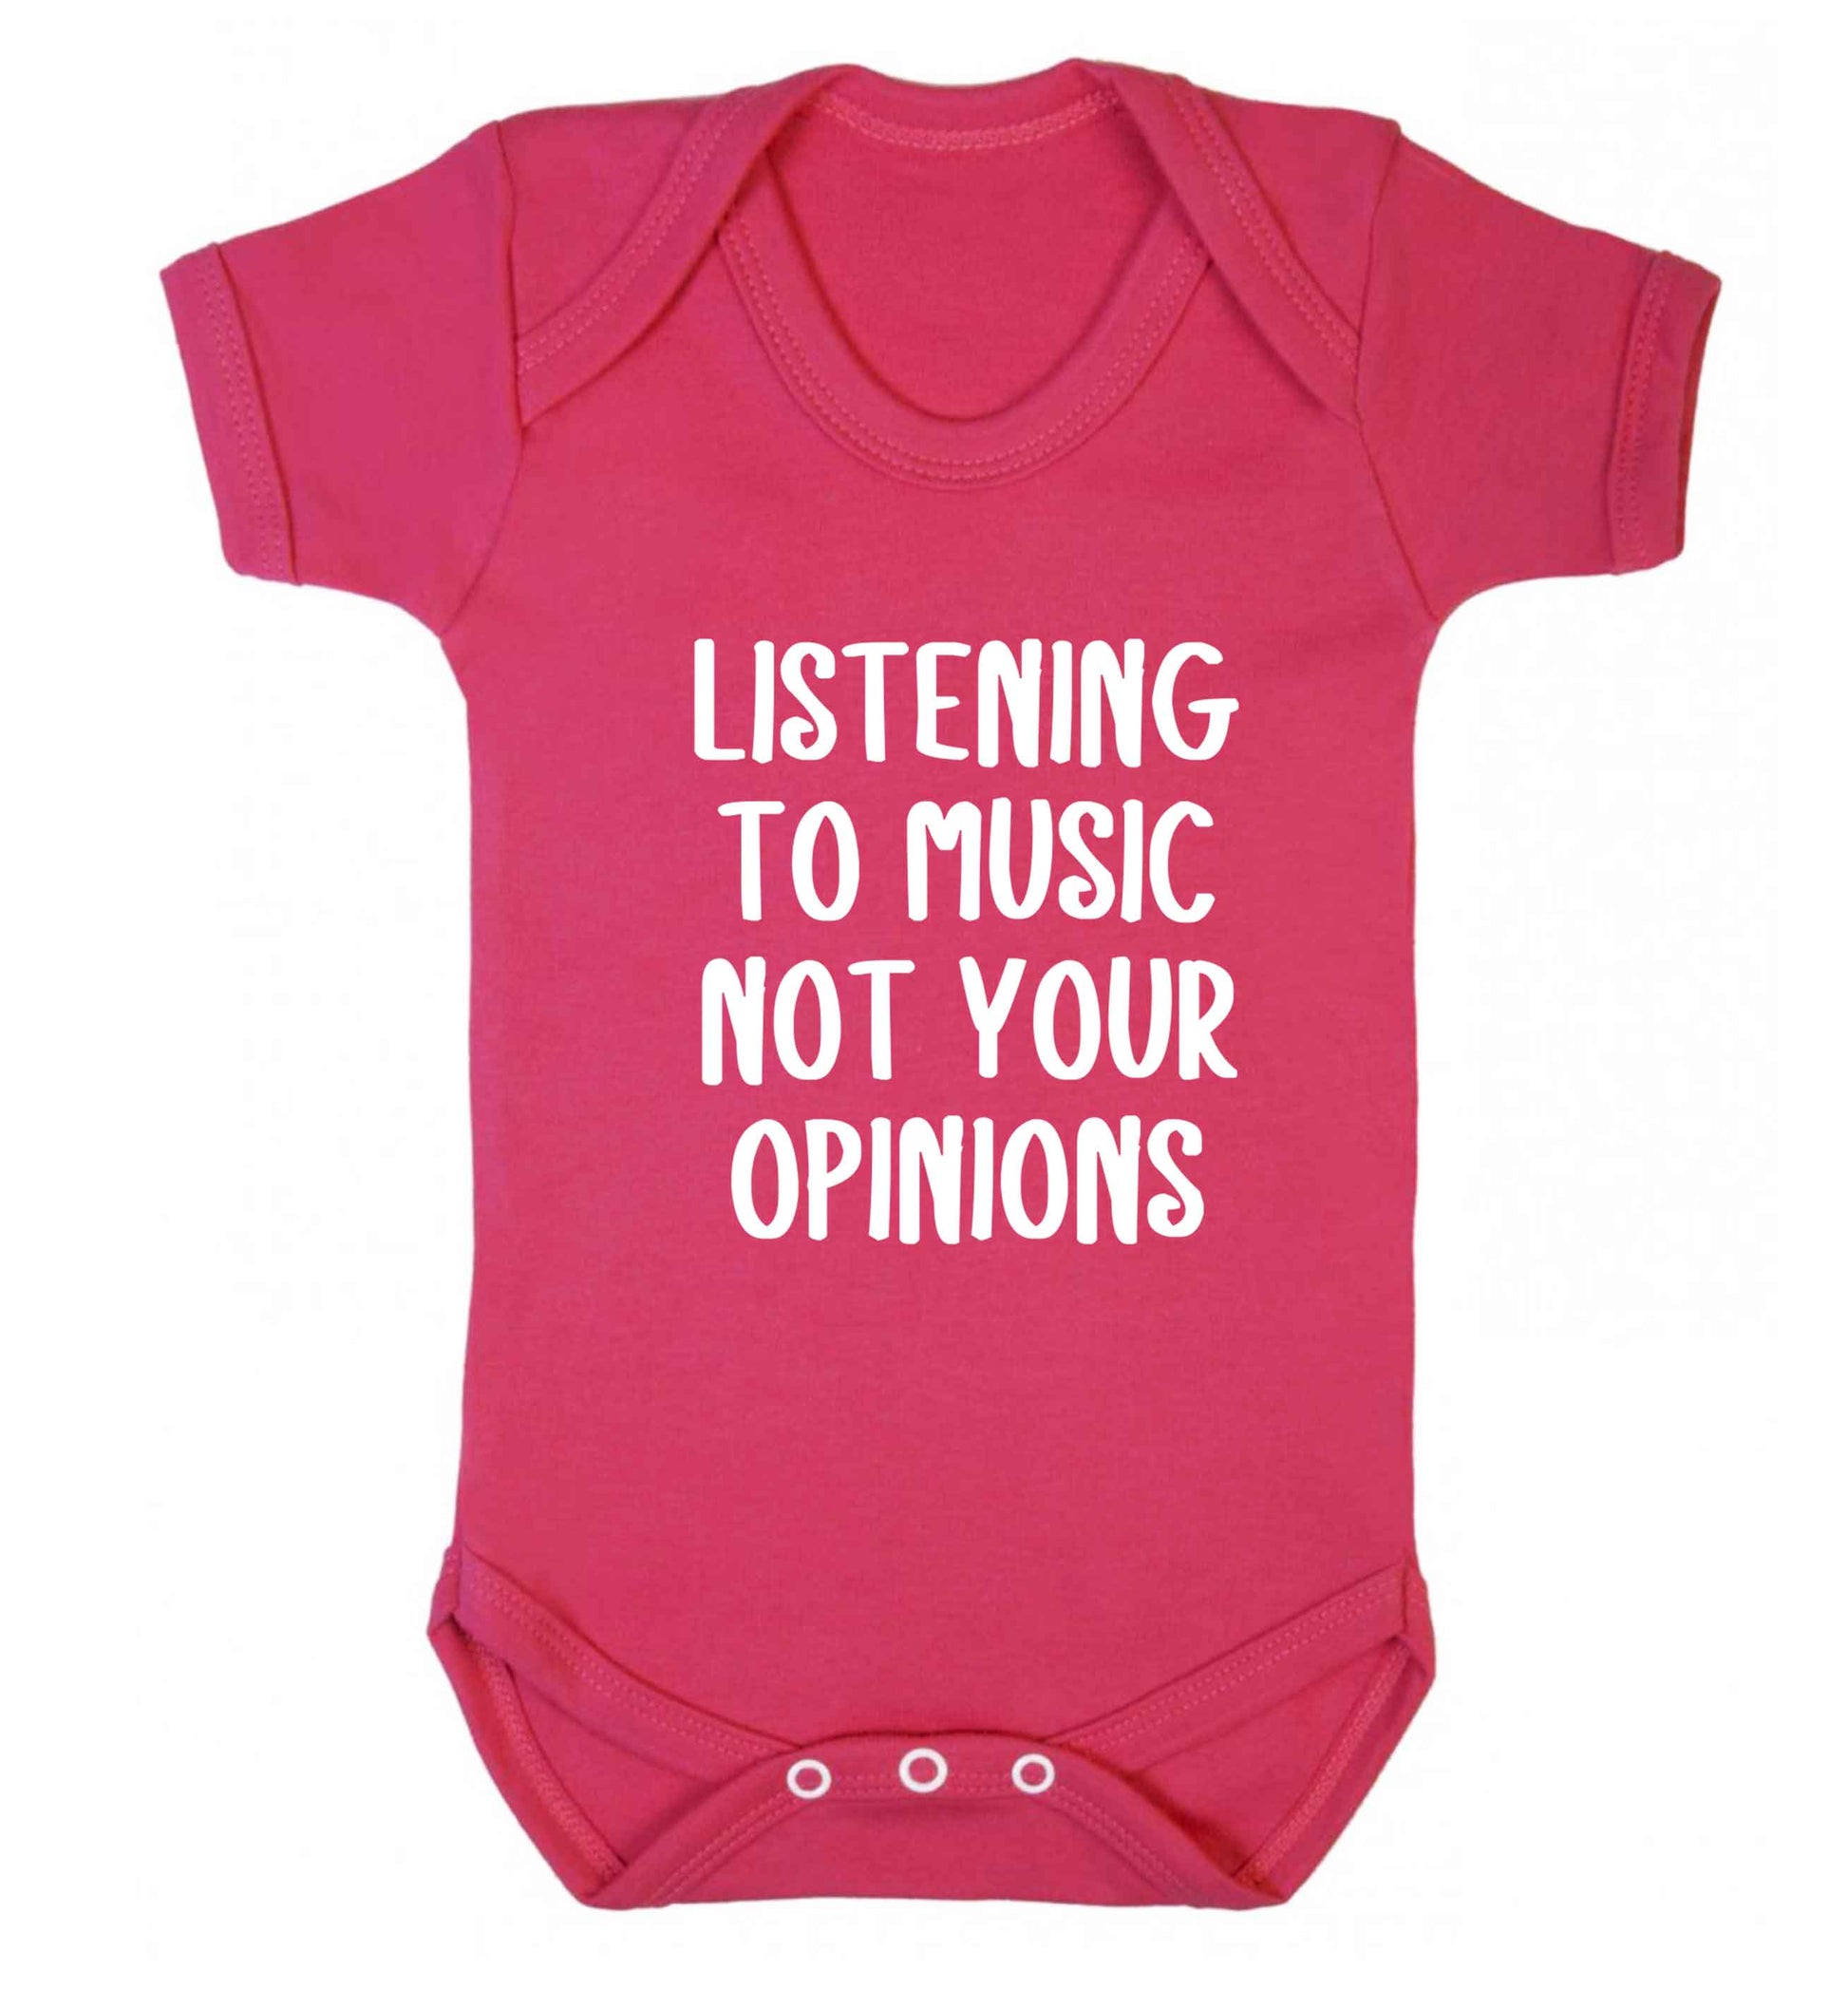 Listening to music not your opinions baby vest dark pink 18-24 months